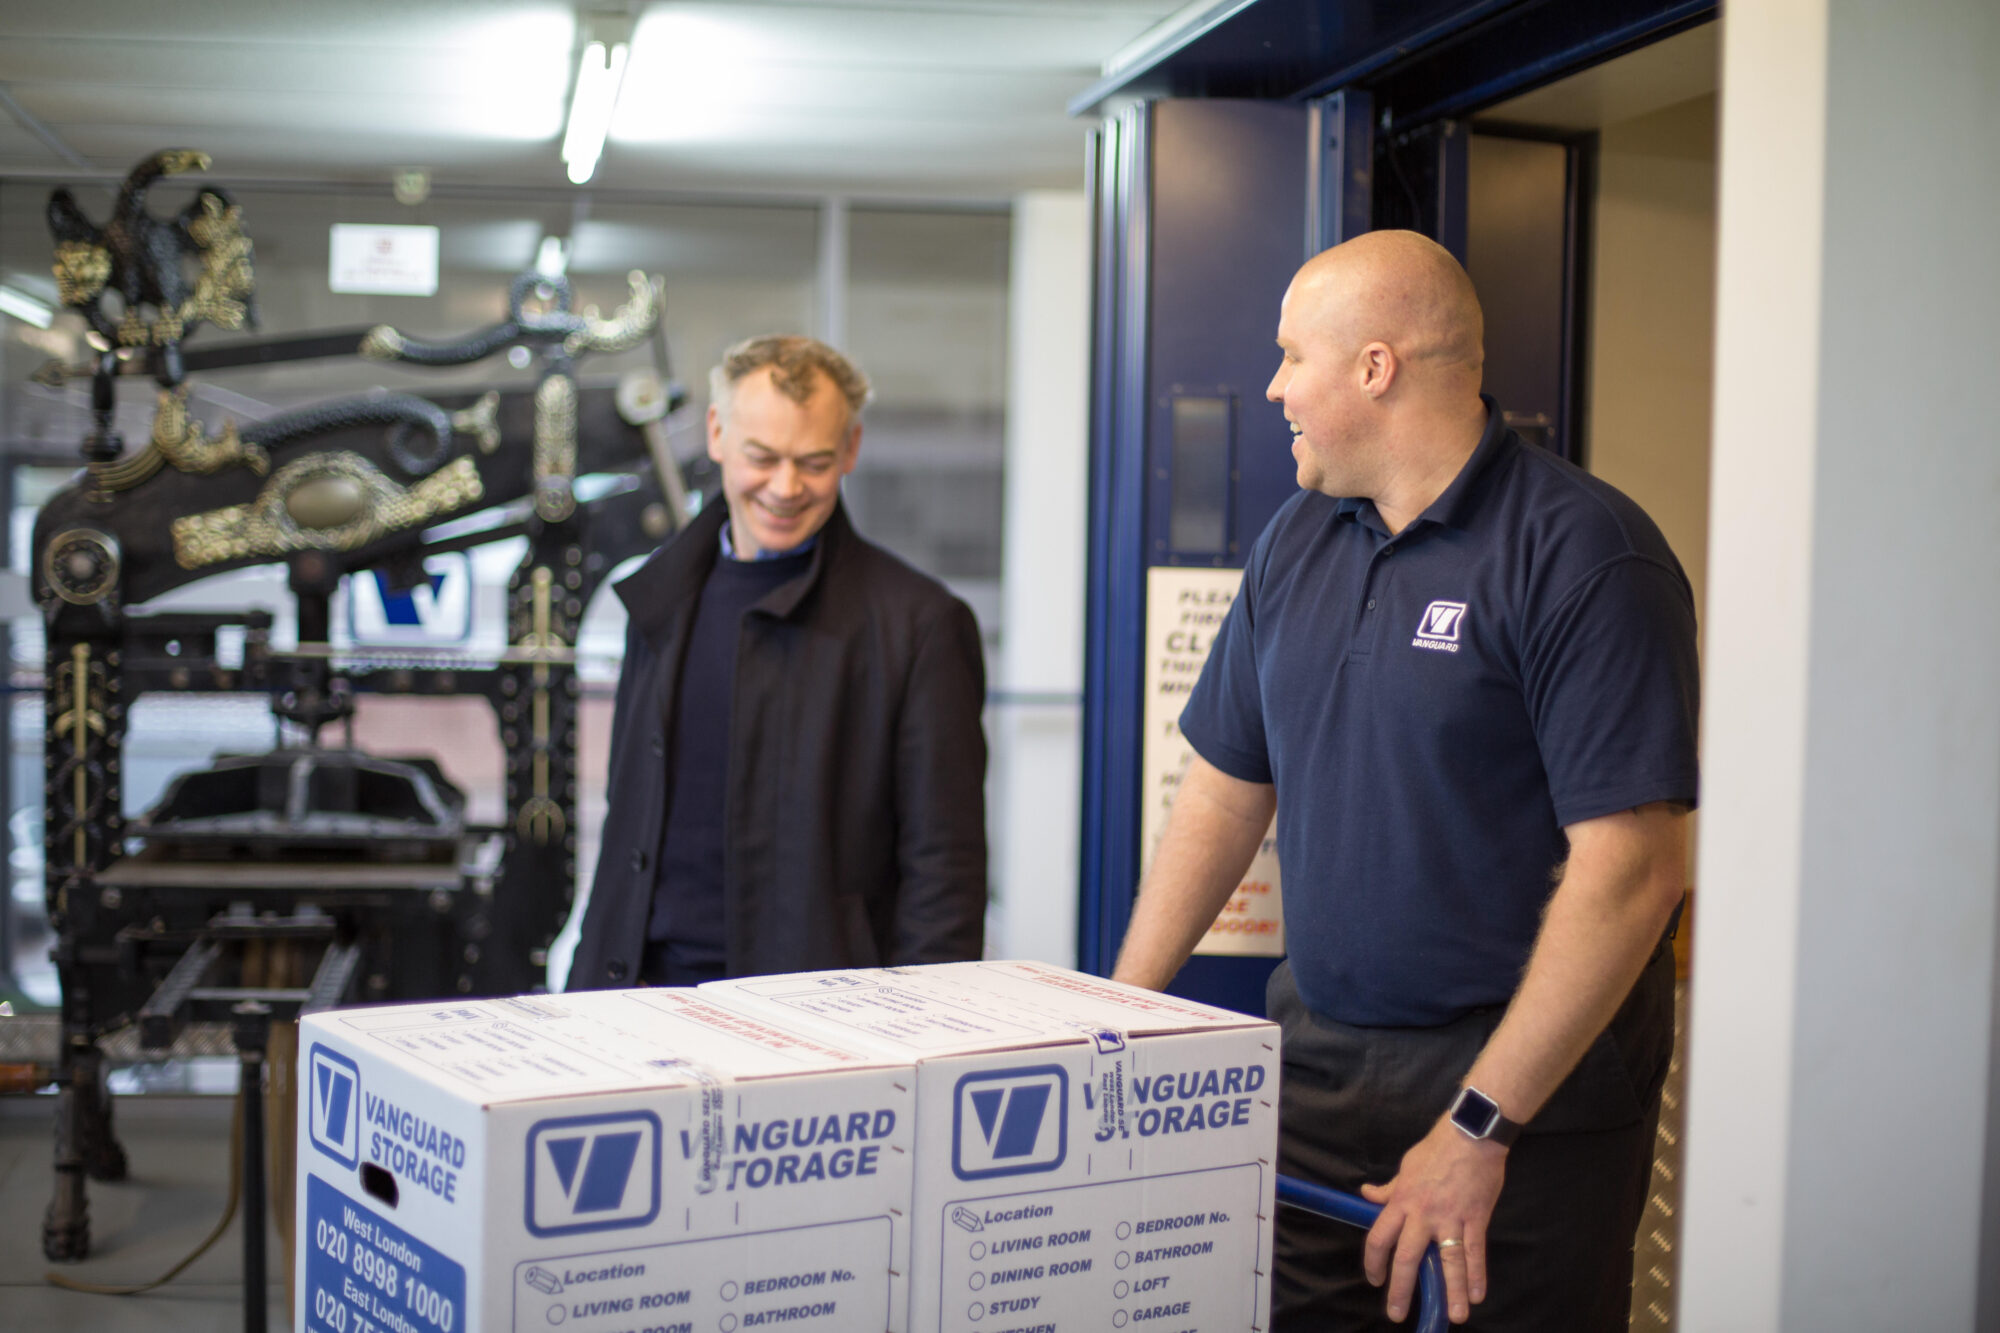 A photo showing a Vanguard employee helping a customer carry some Vanguard cardboard boxes into a self-storage unit.